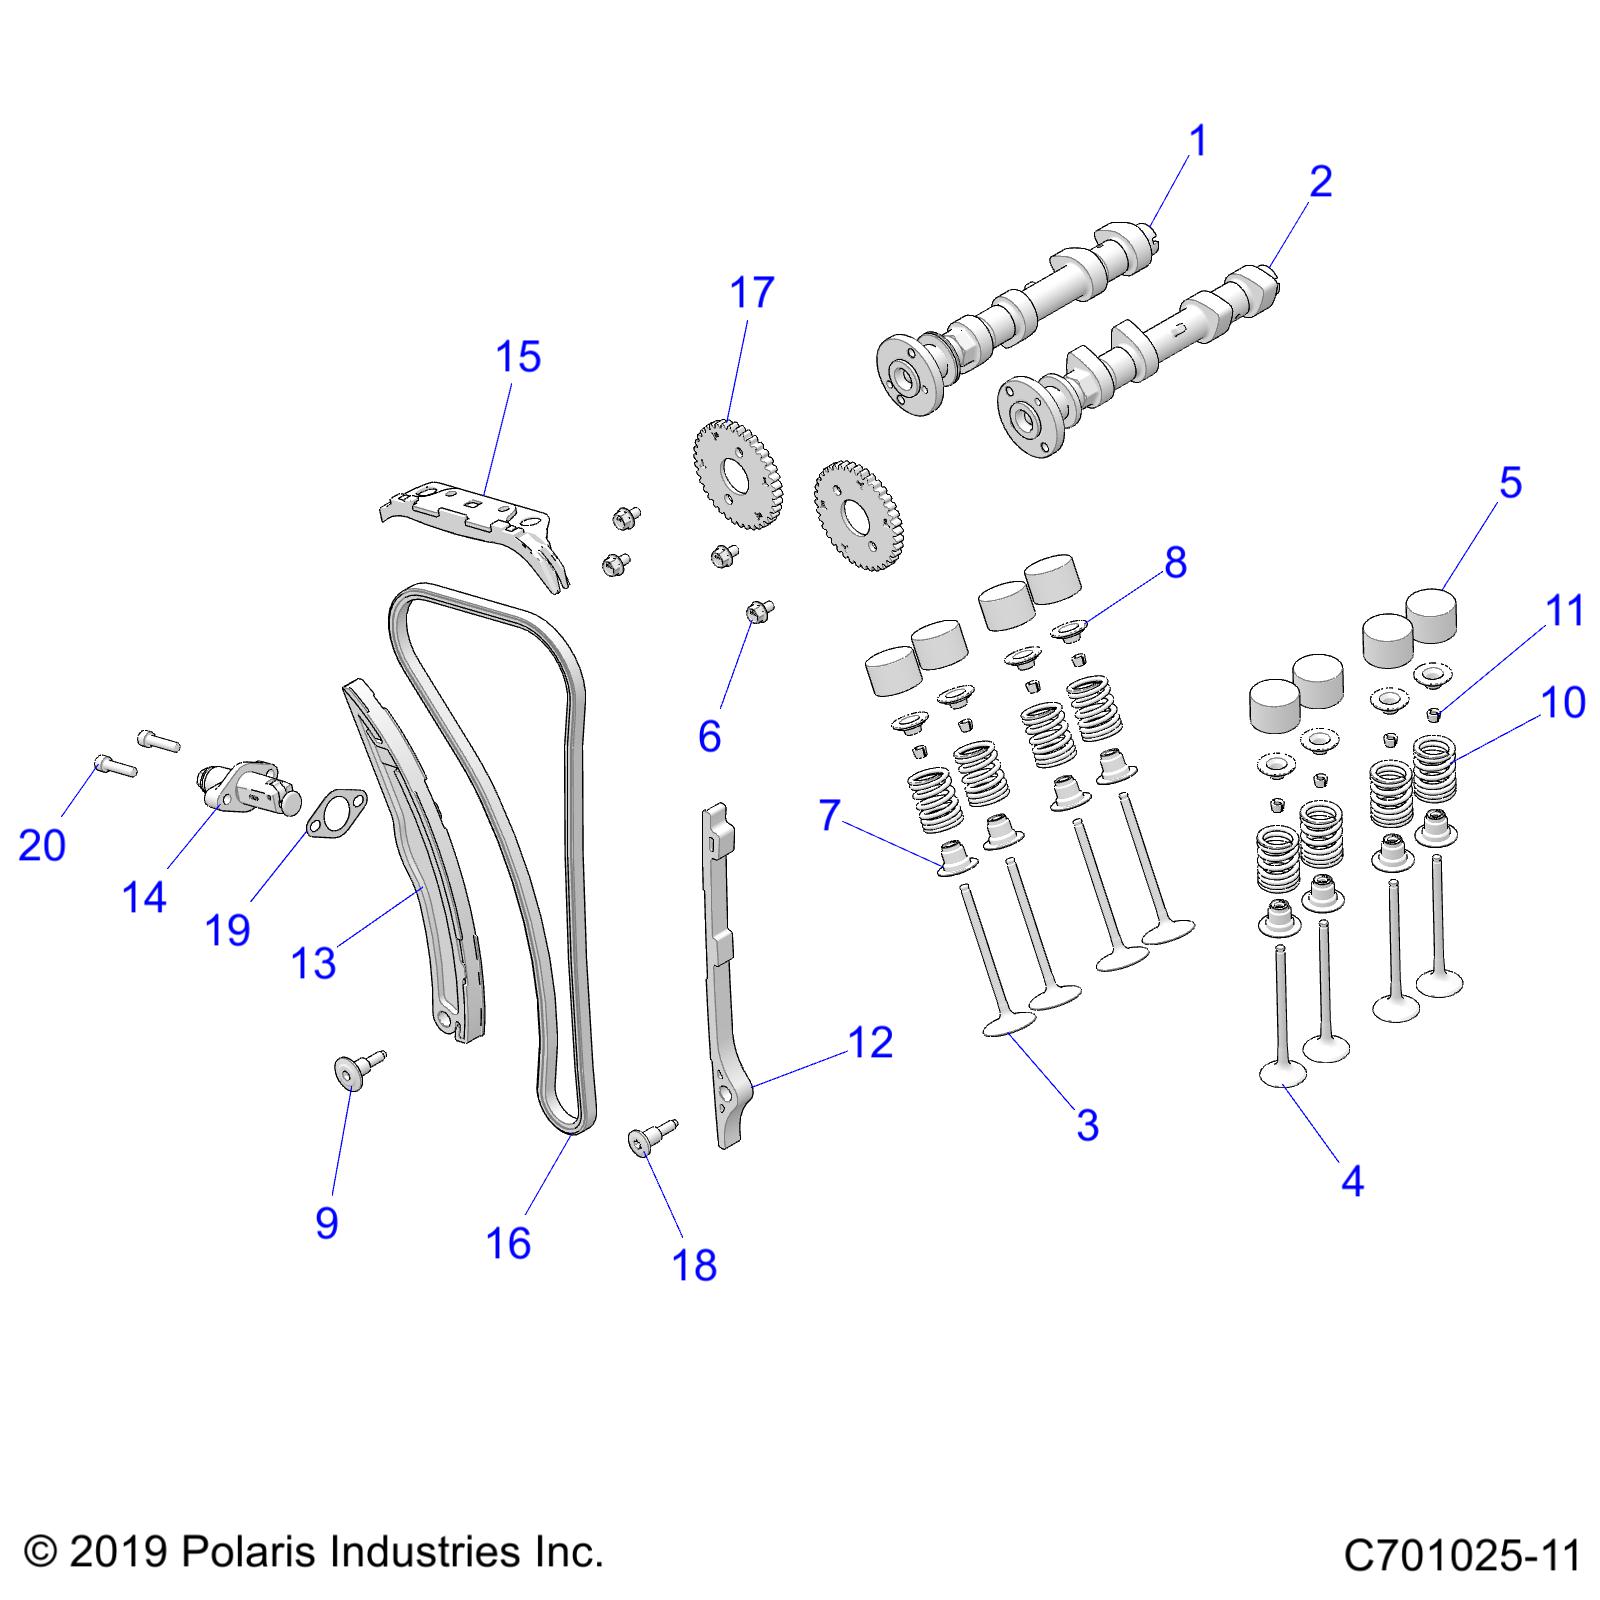 Part Number : 3022151 CAM CHAIN TENSIONER GUIDE